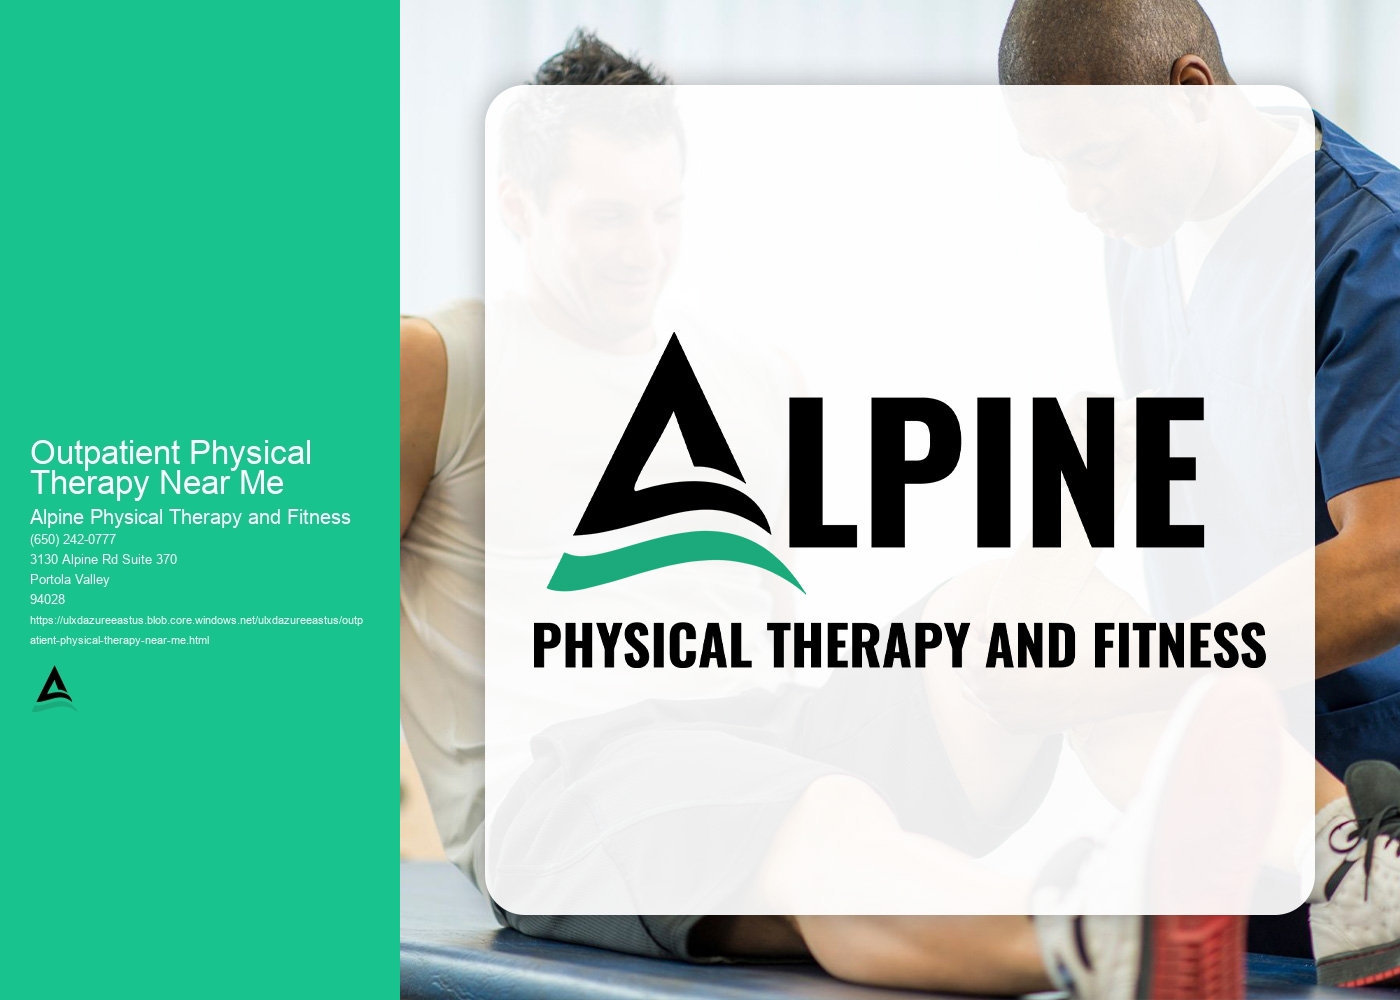 What are the benefits of incorporating manual therapy into outpatient physical therapy sessions?